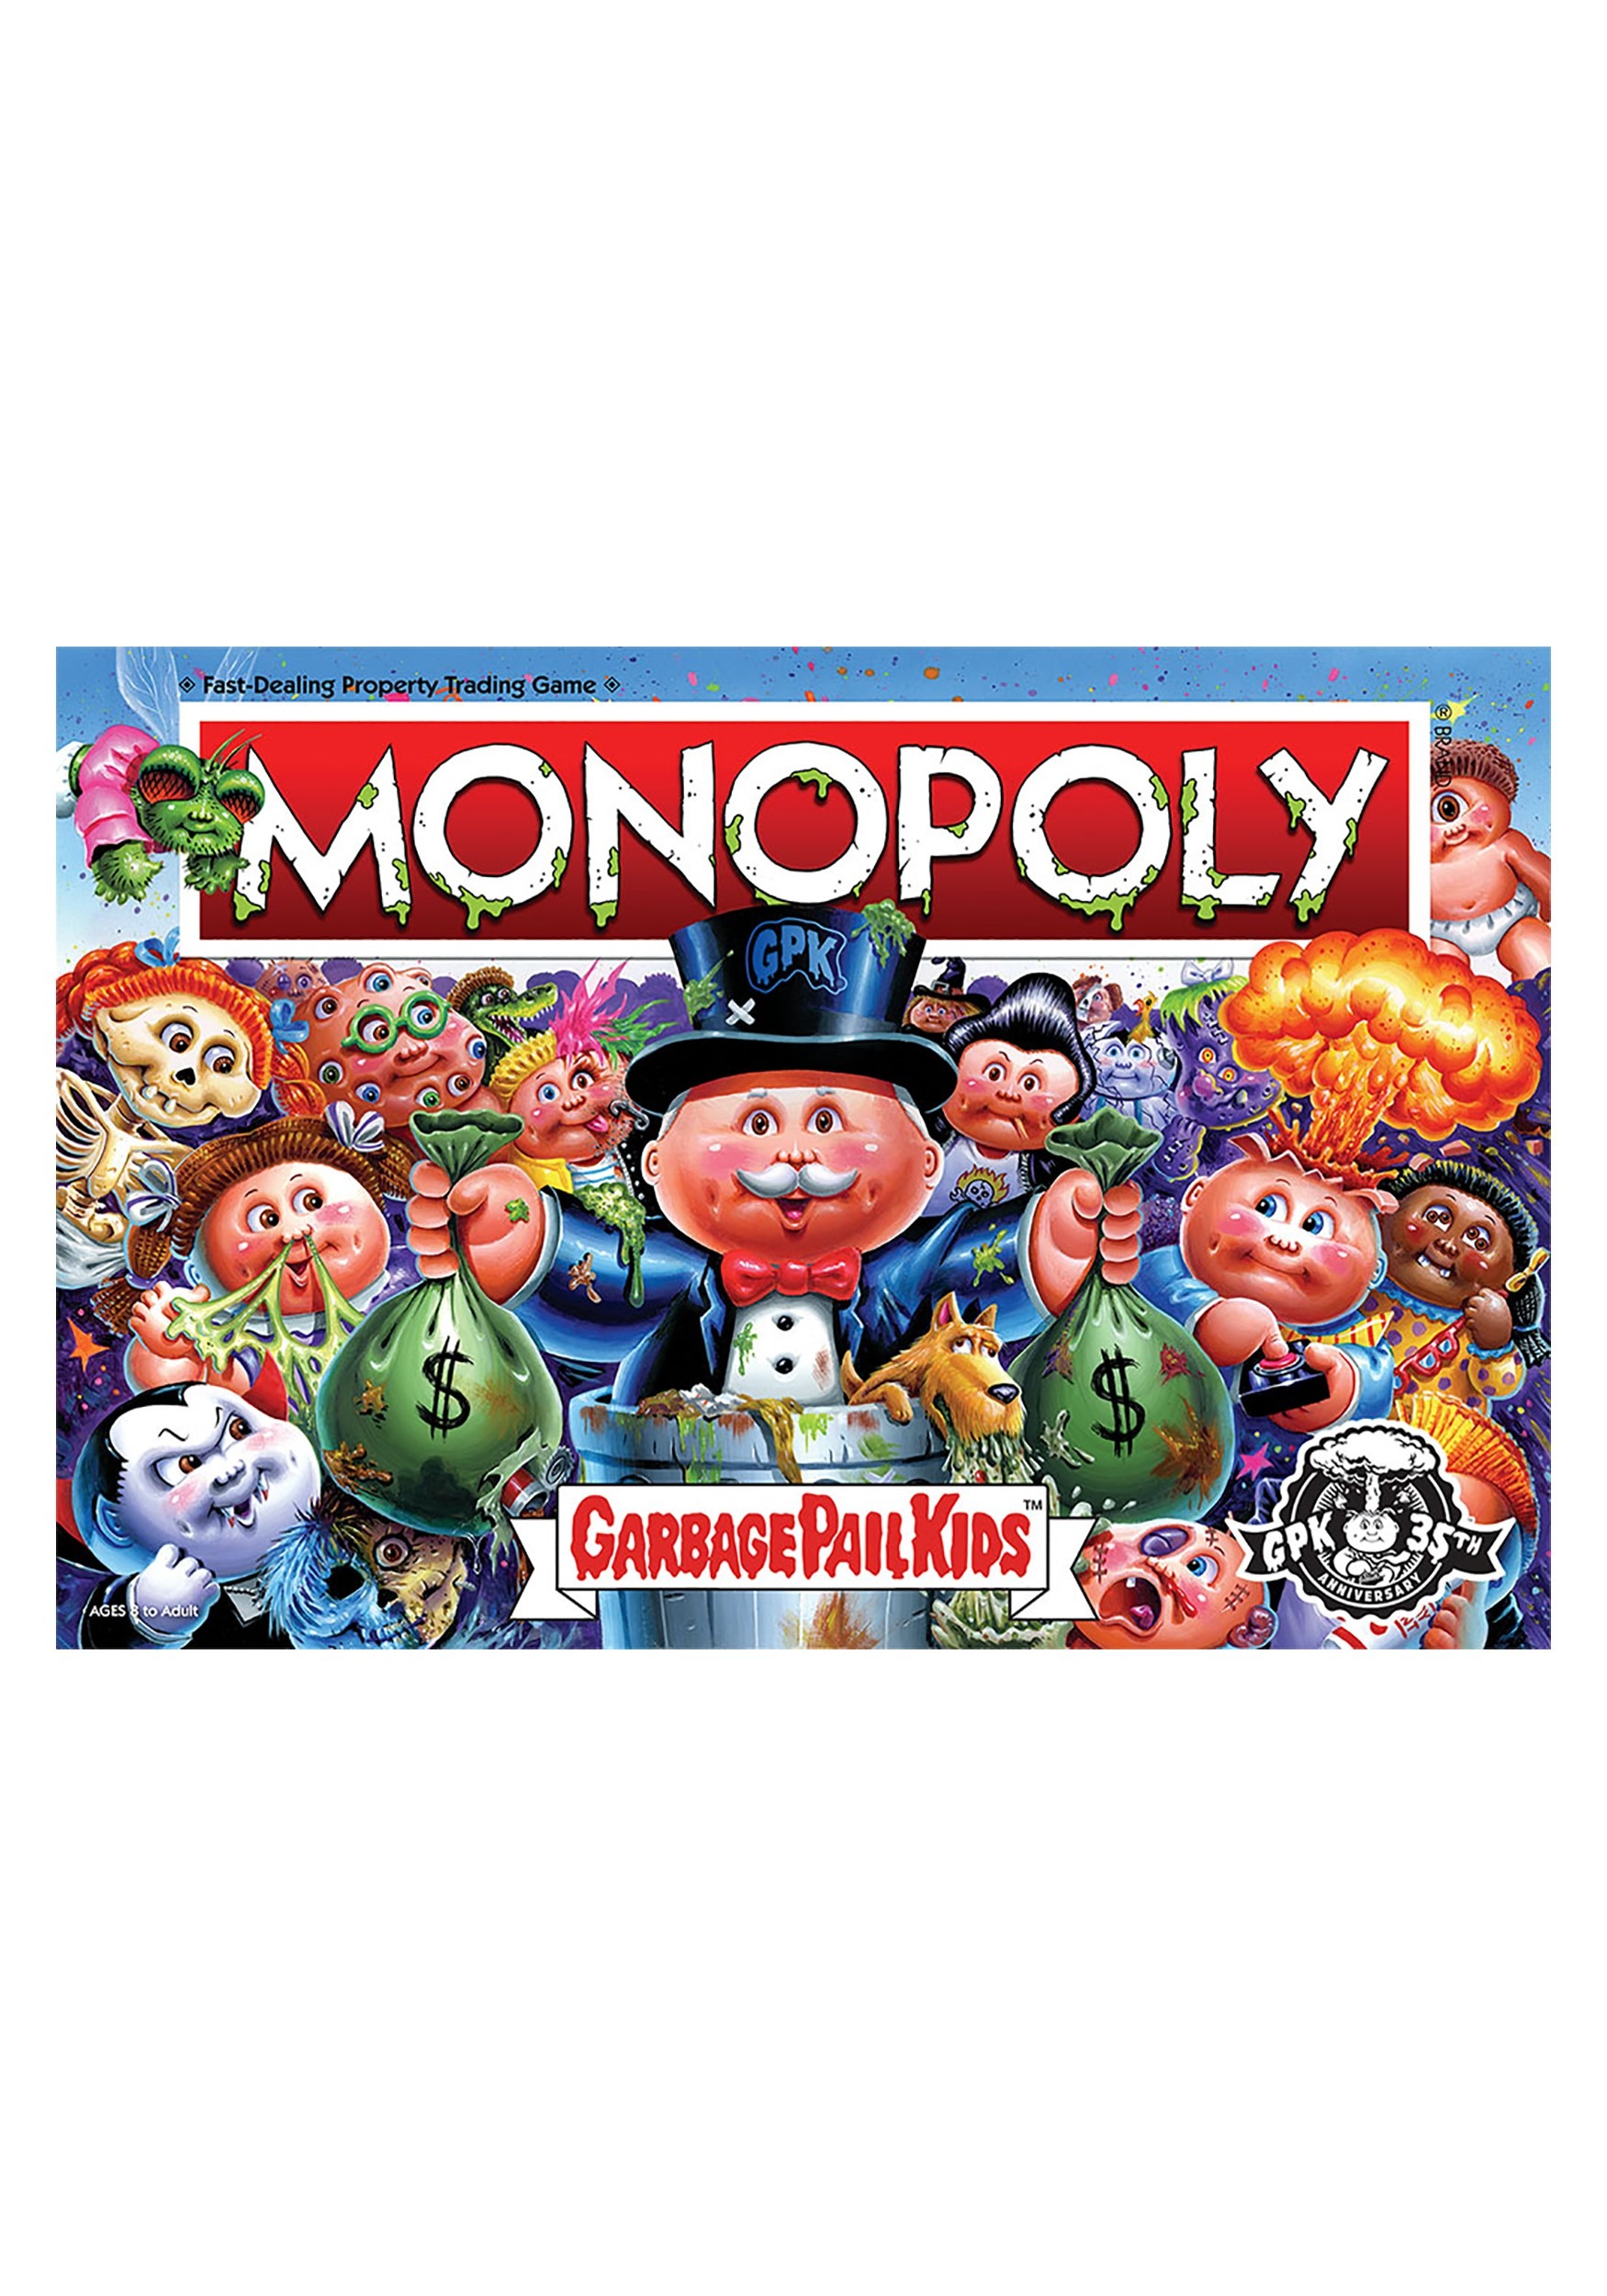 USAopoly Monopoly Garbage Pail Kids Board Game USAMN137-729 for sale online 